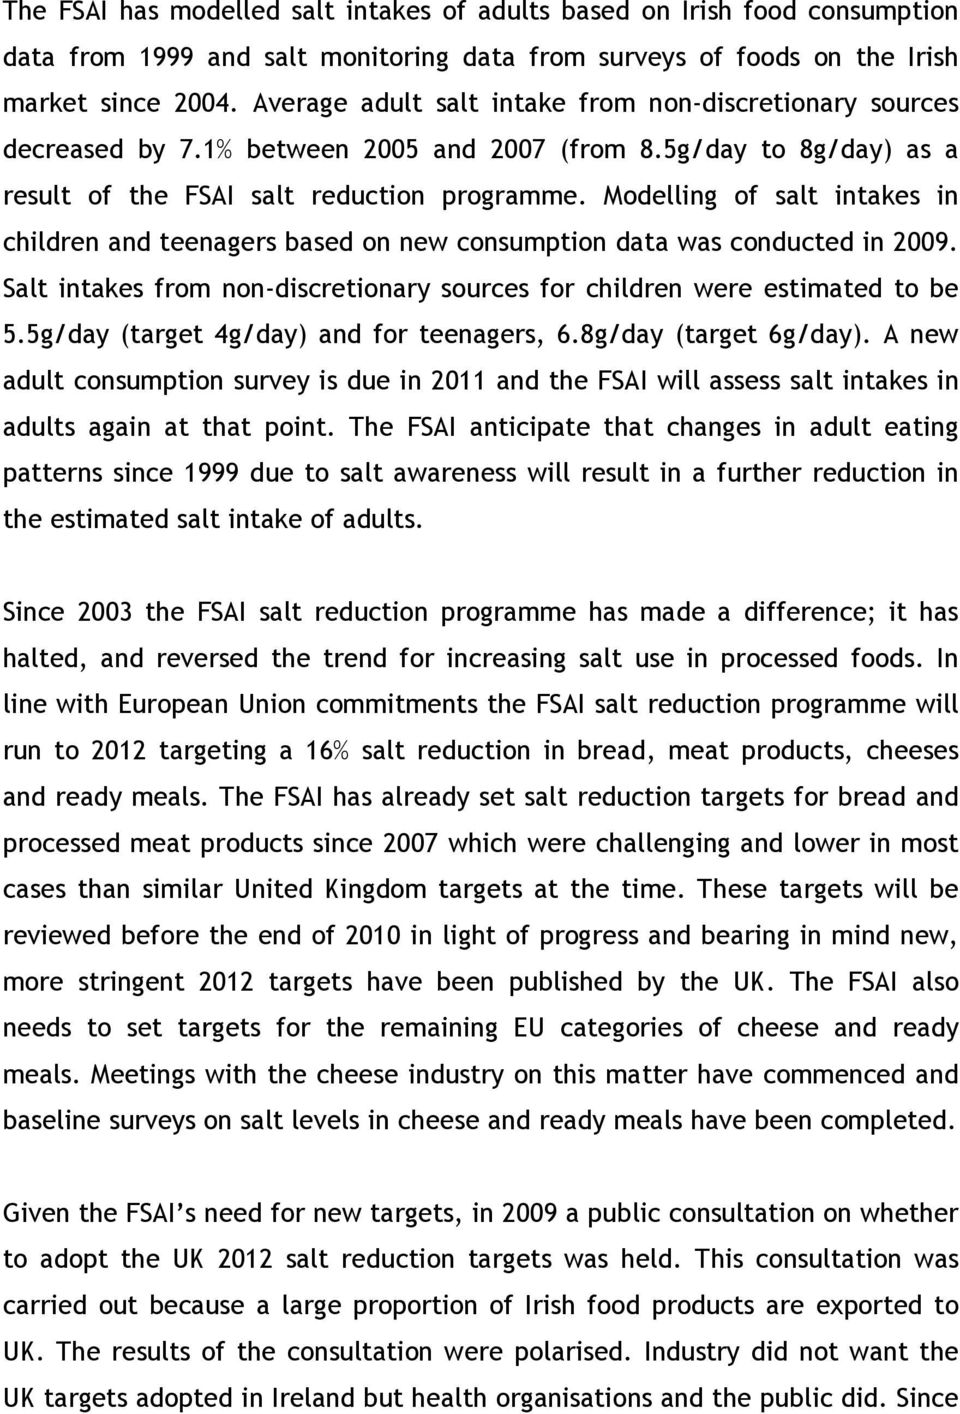 Modelling of salt intakes in children and teenagers based on new consumption data was conducted in 2009. Salt intakes from non-discretionary sources for children were estimated to be 5.